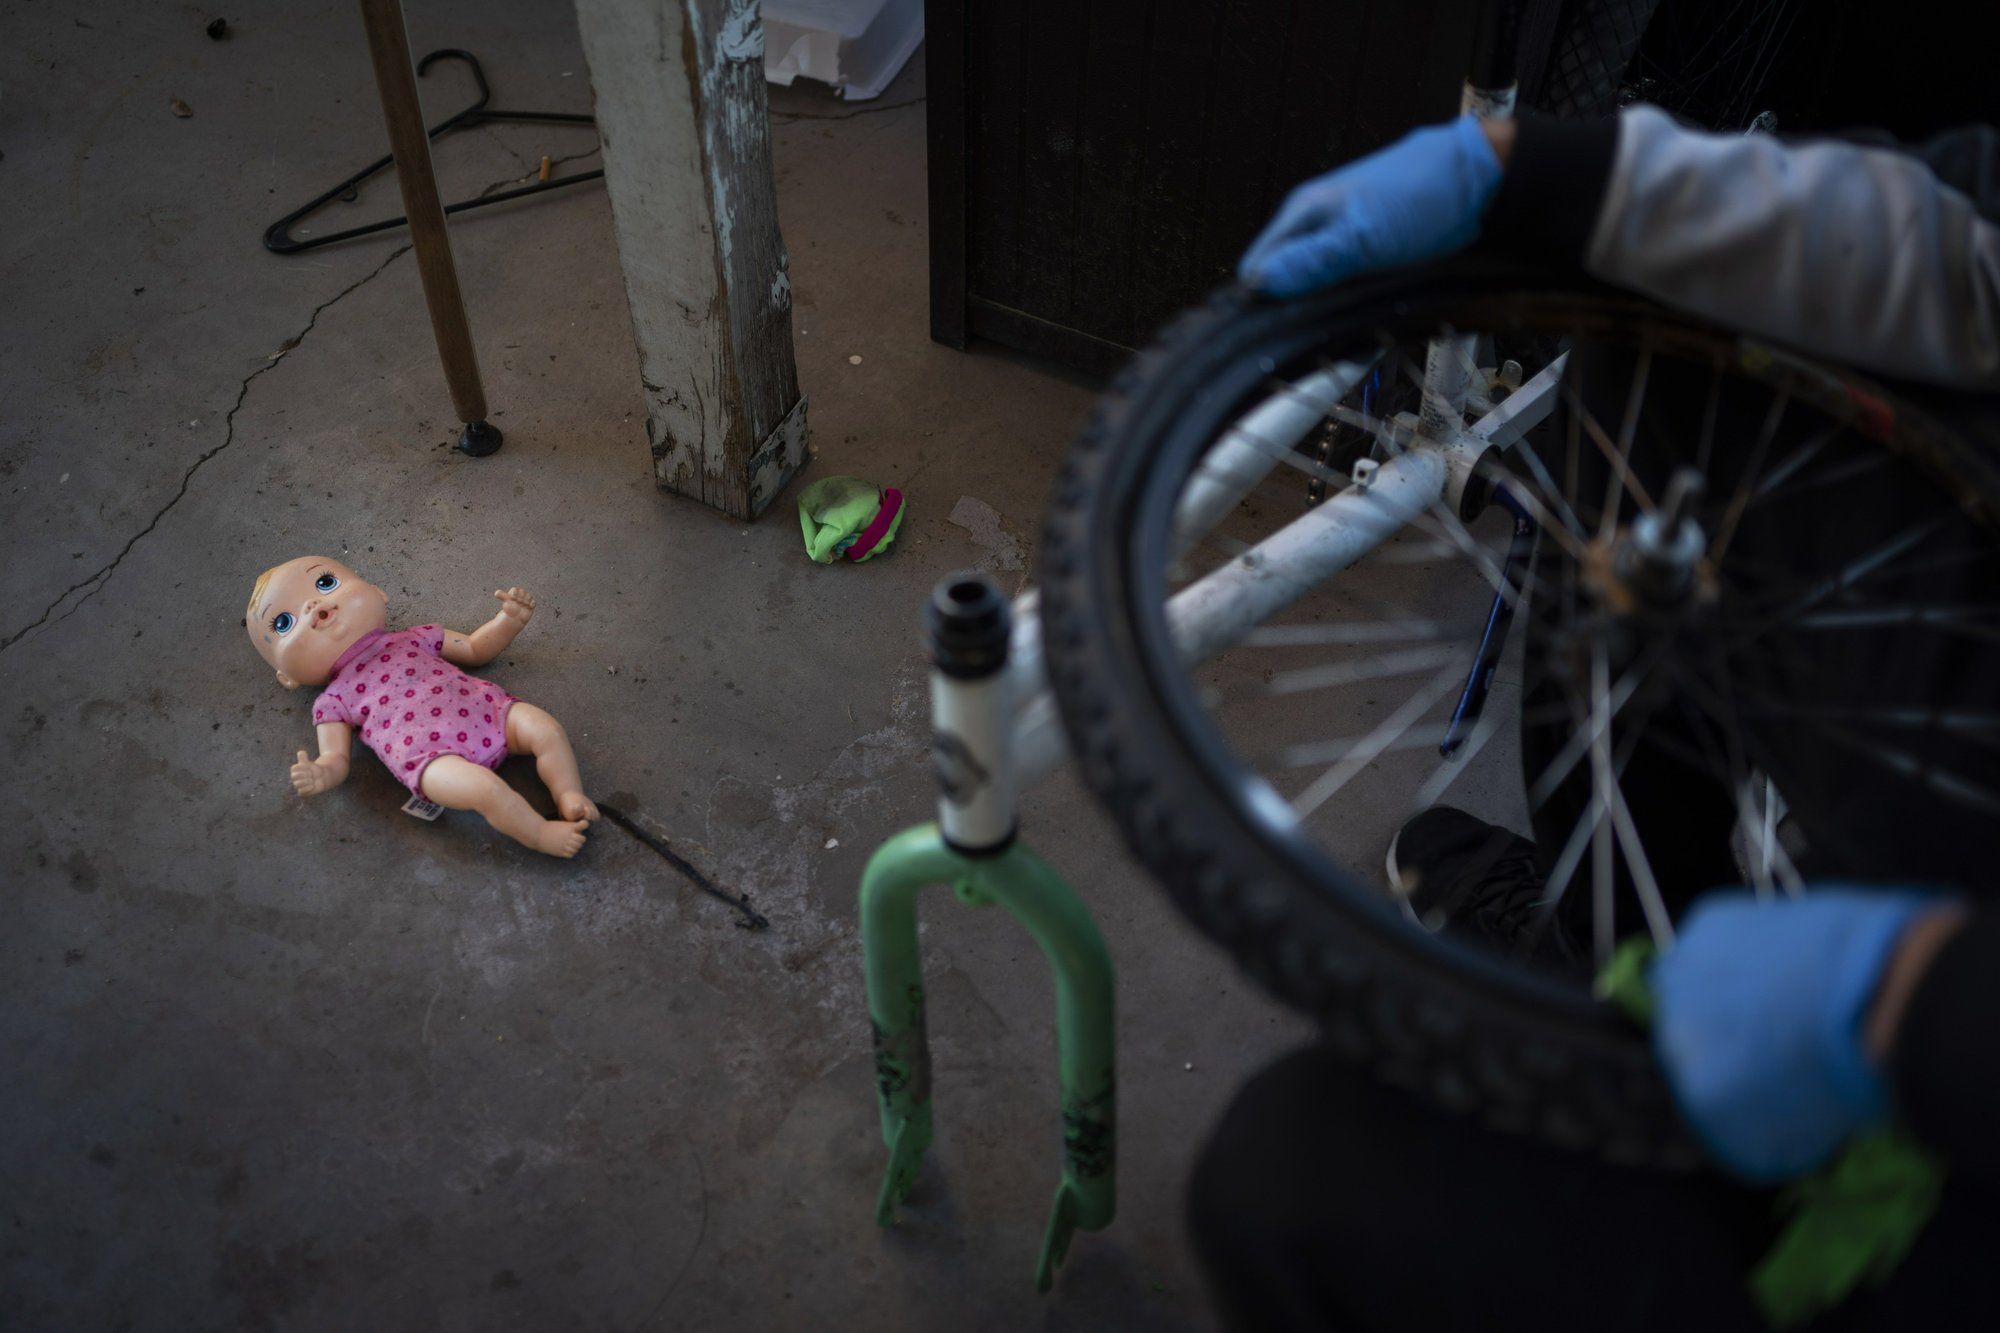 A doll belonging to a grandchild of Norma Flores lies on the ground in the backyard of her home in Henderson, Nev., Tuesday, Nov. 10, 2020. Image by Wong Maye-E / AP Photo. United States, 2020.